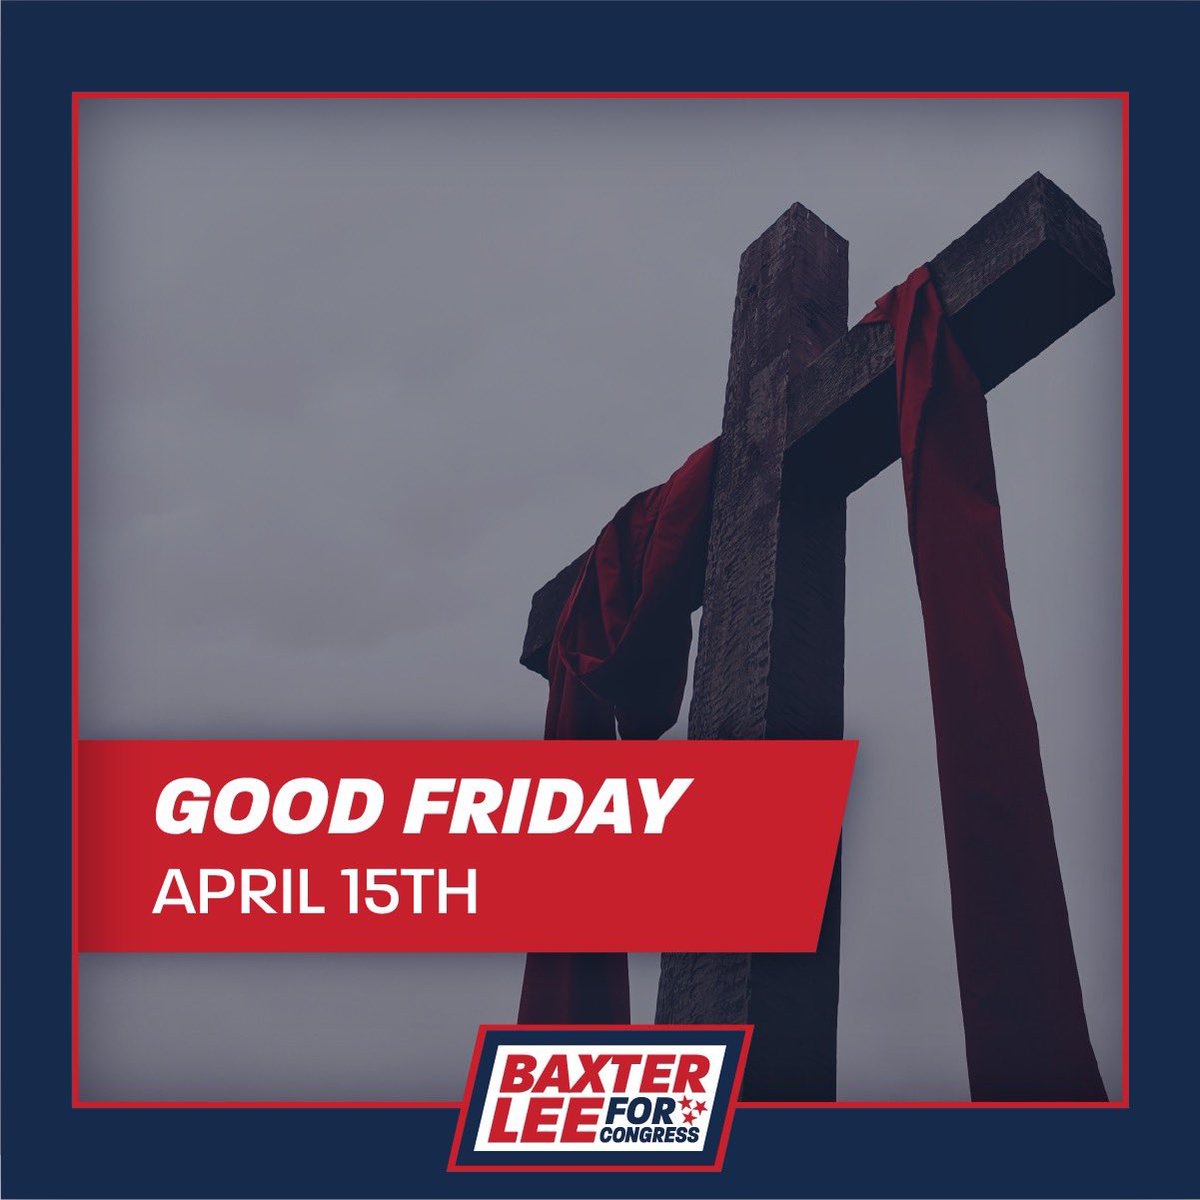 One final breath and it was finished. Our King had laid his life down for our sins. Today we remember His sacrifice and look forward to knowing that Sunday is coming.